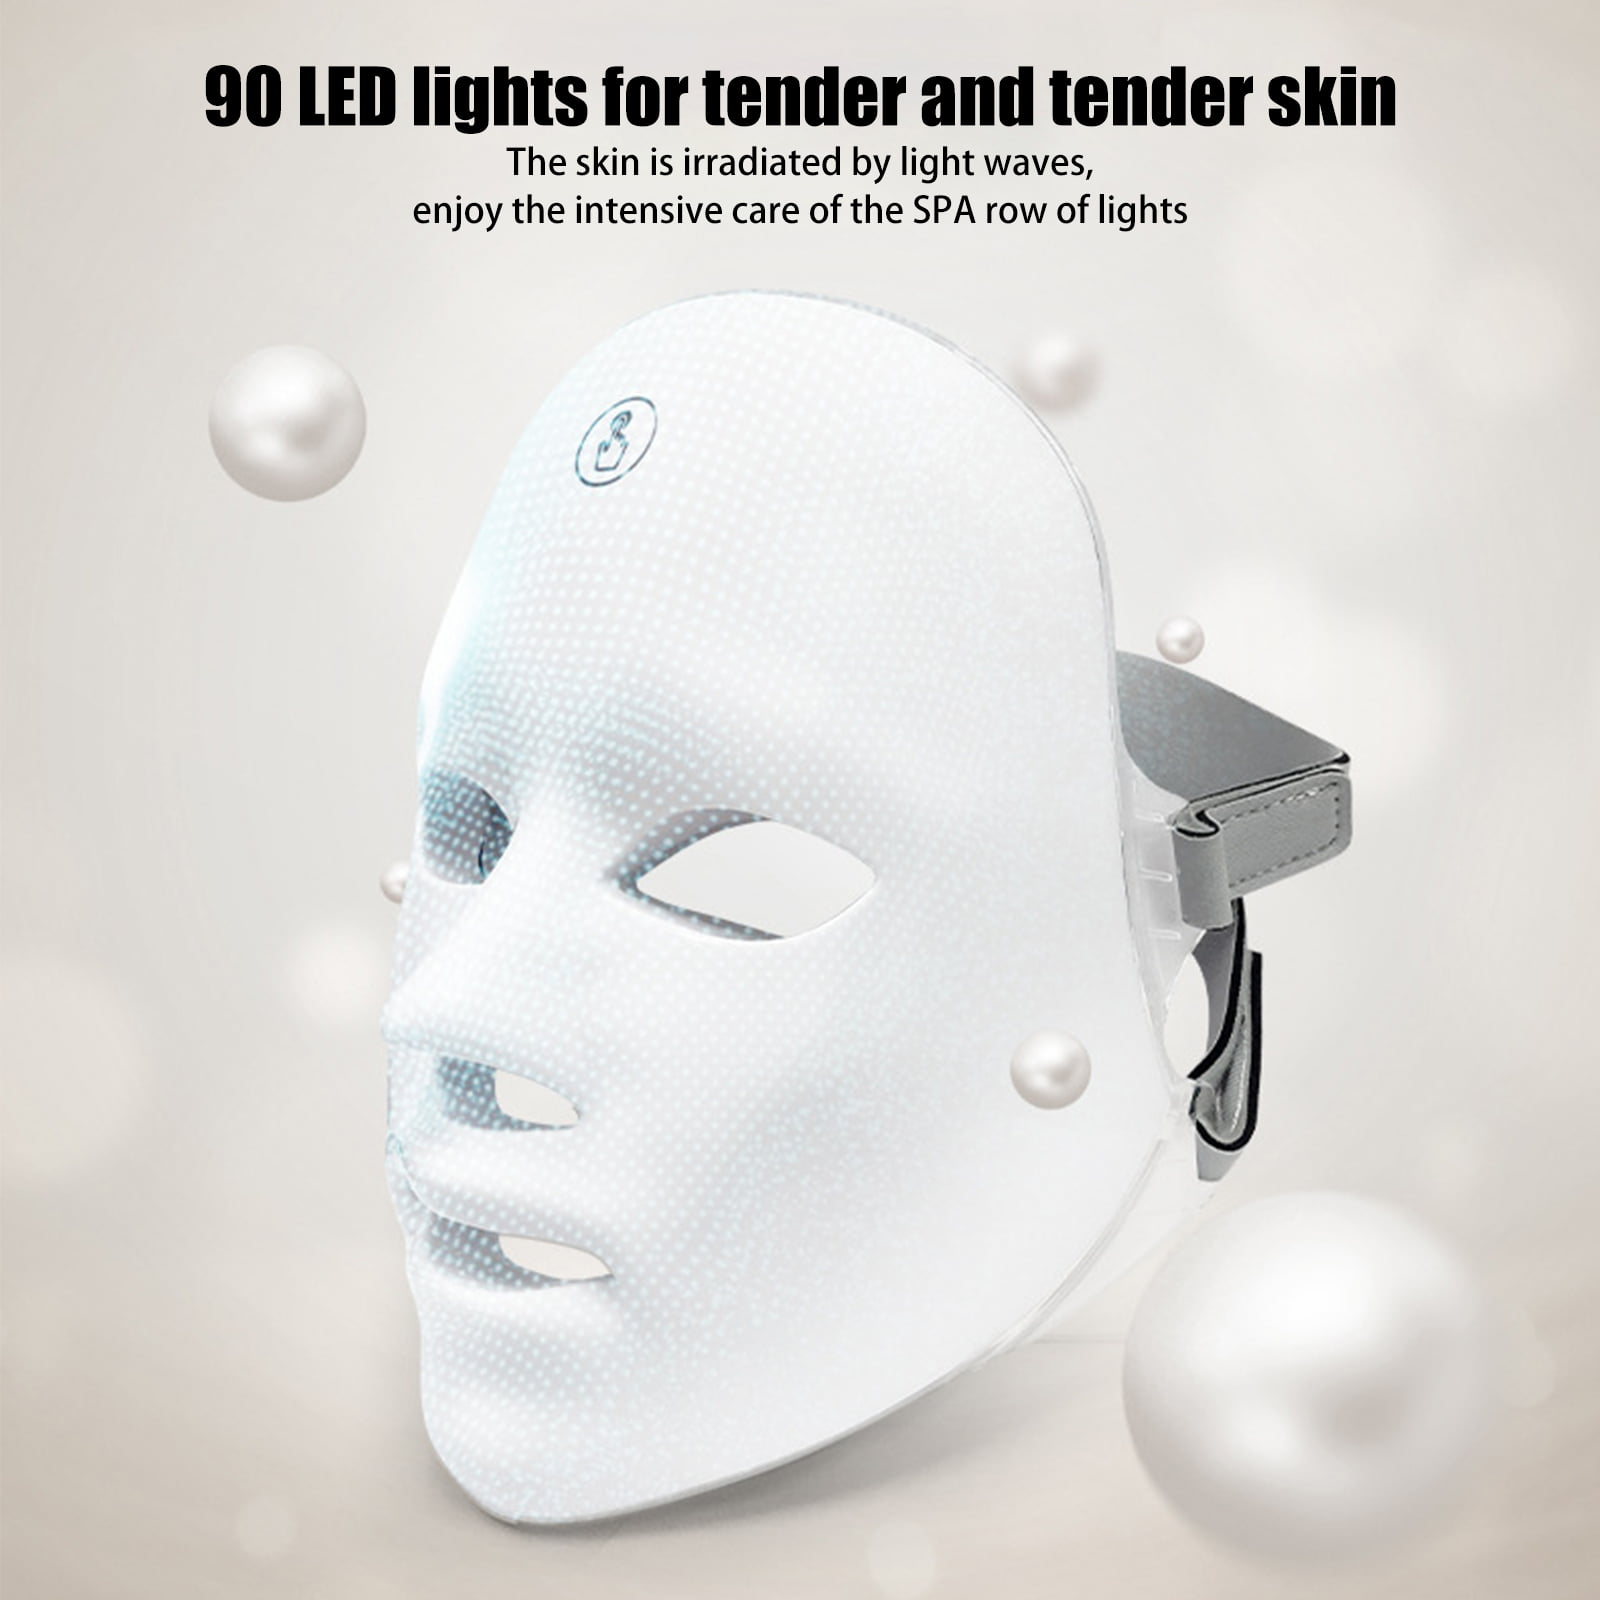  Bestqool LED Mask Photon LED Light Therapy - 6 Colors with  Near Infrared Light LED Face Mask for Skin Rejuvenation SPA Facial Body  Skin Care Beauty Salon Device : Beauty